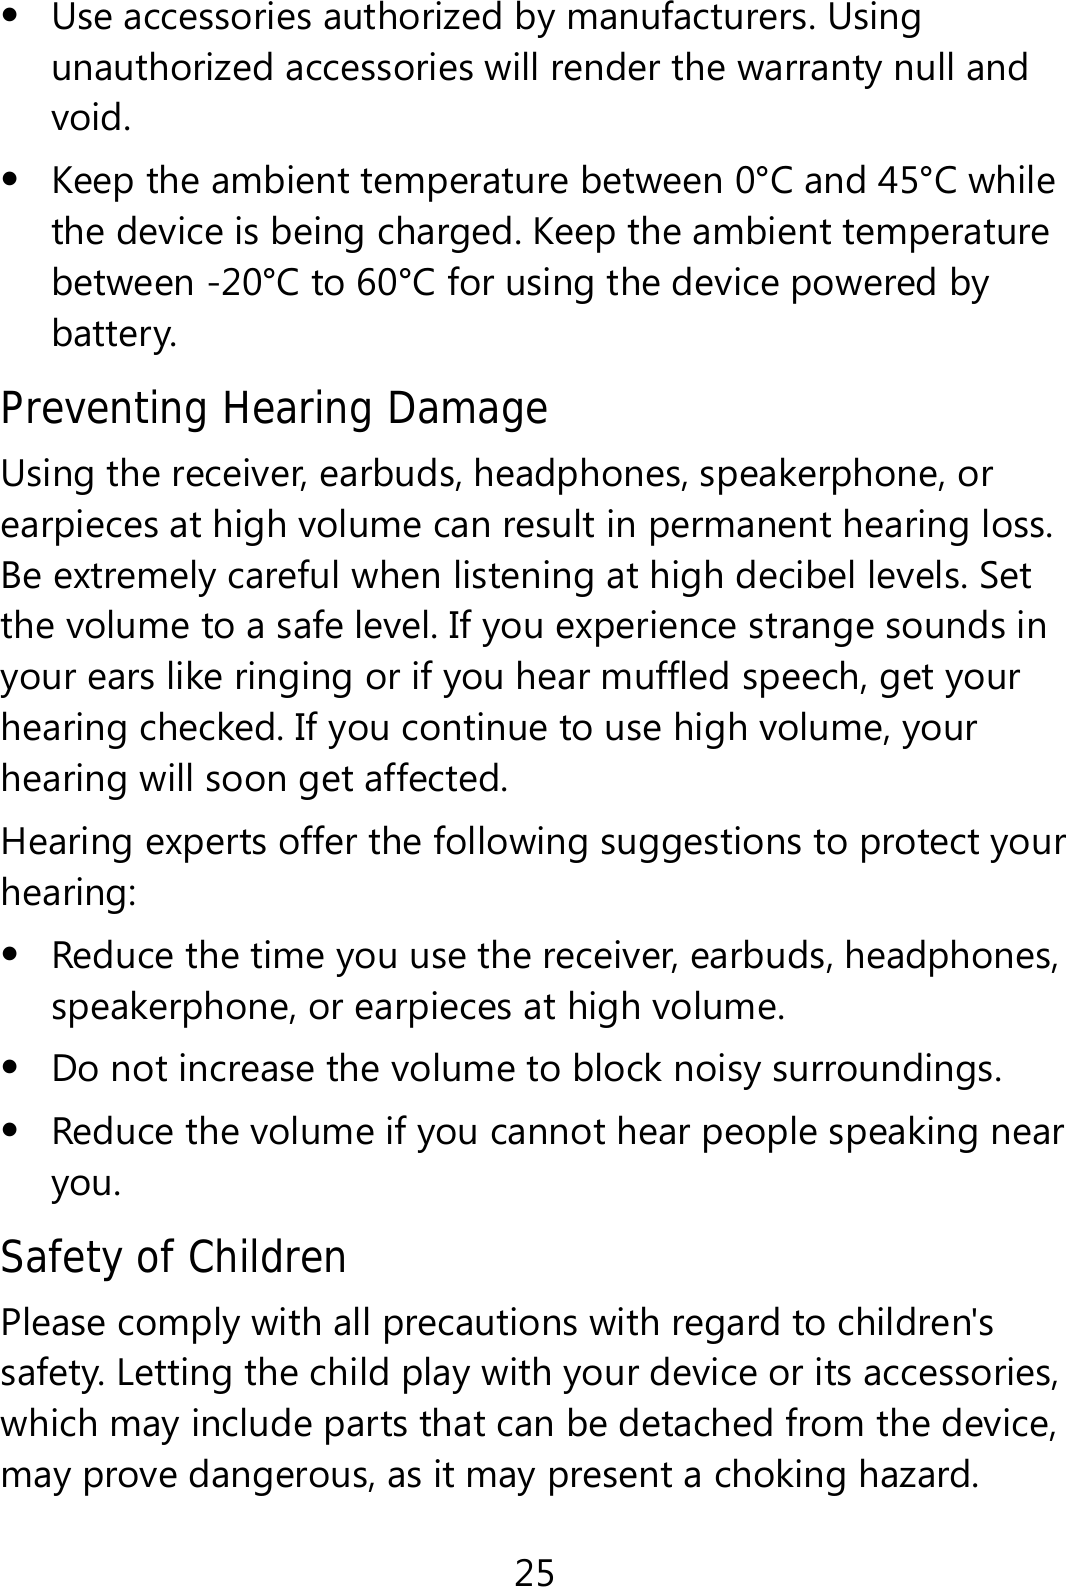 25  Use accessories authorized by manufacturers. Using unauthorized accessories will render the warranty null and void.  Keep the ambient temperature between 0°C and 45°C while the device is being charged. Keep the ambient temperature between -20°C to 60°C for using the device powered by battery. Preventing Hearing Damage Using the receiver, earbuds, headphones, speakerphone, or earpieces at high volume can result in permanent hearing loss. Be extremely careful when listening at high decibel levels. Set the volume to a safe level. If you experience strange sounds in your ears like ringing or if you hear muffled speech, get your hearing checked. If you continue to use high volume, your hearing will soon get affected. Hearing experts offer the following suggestions to protect your hearing:  Reduce the time you use the receiver, earbuds, headphones, speakerphone, or earpieces at high volume.  Do not increase the volume to block noisy surroundings.  Reduce the volume if you cannot hear people speaking near you. Safety of Children Please comply with all precautions with regard to children&apos;s safety. Letting the child play with your device or its accessories, which may include parts that can be detached from the device, may prove dangerous, as it may present a choking hazard. 